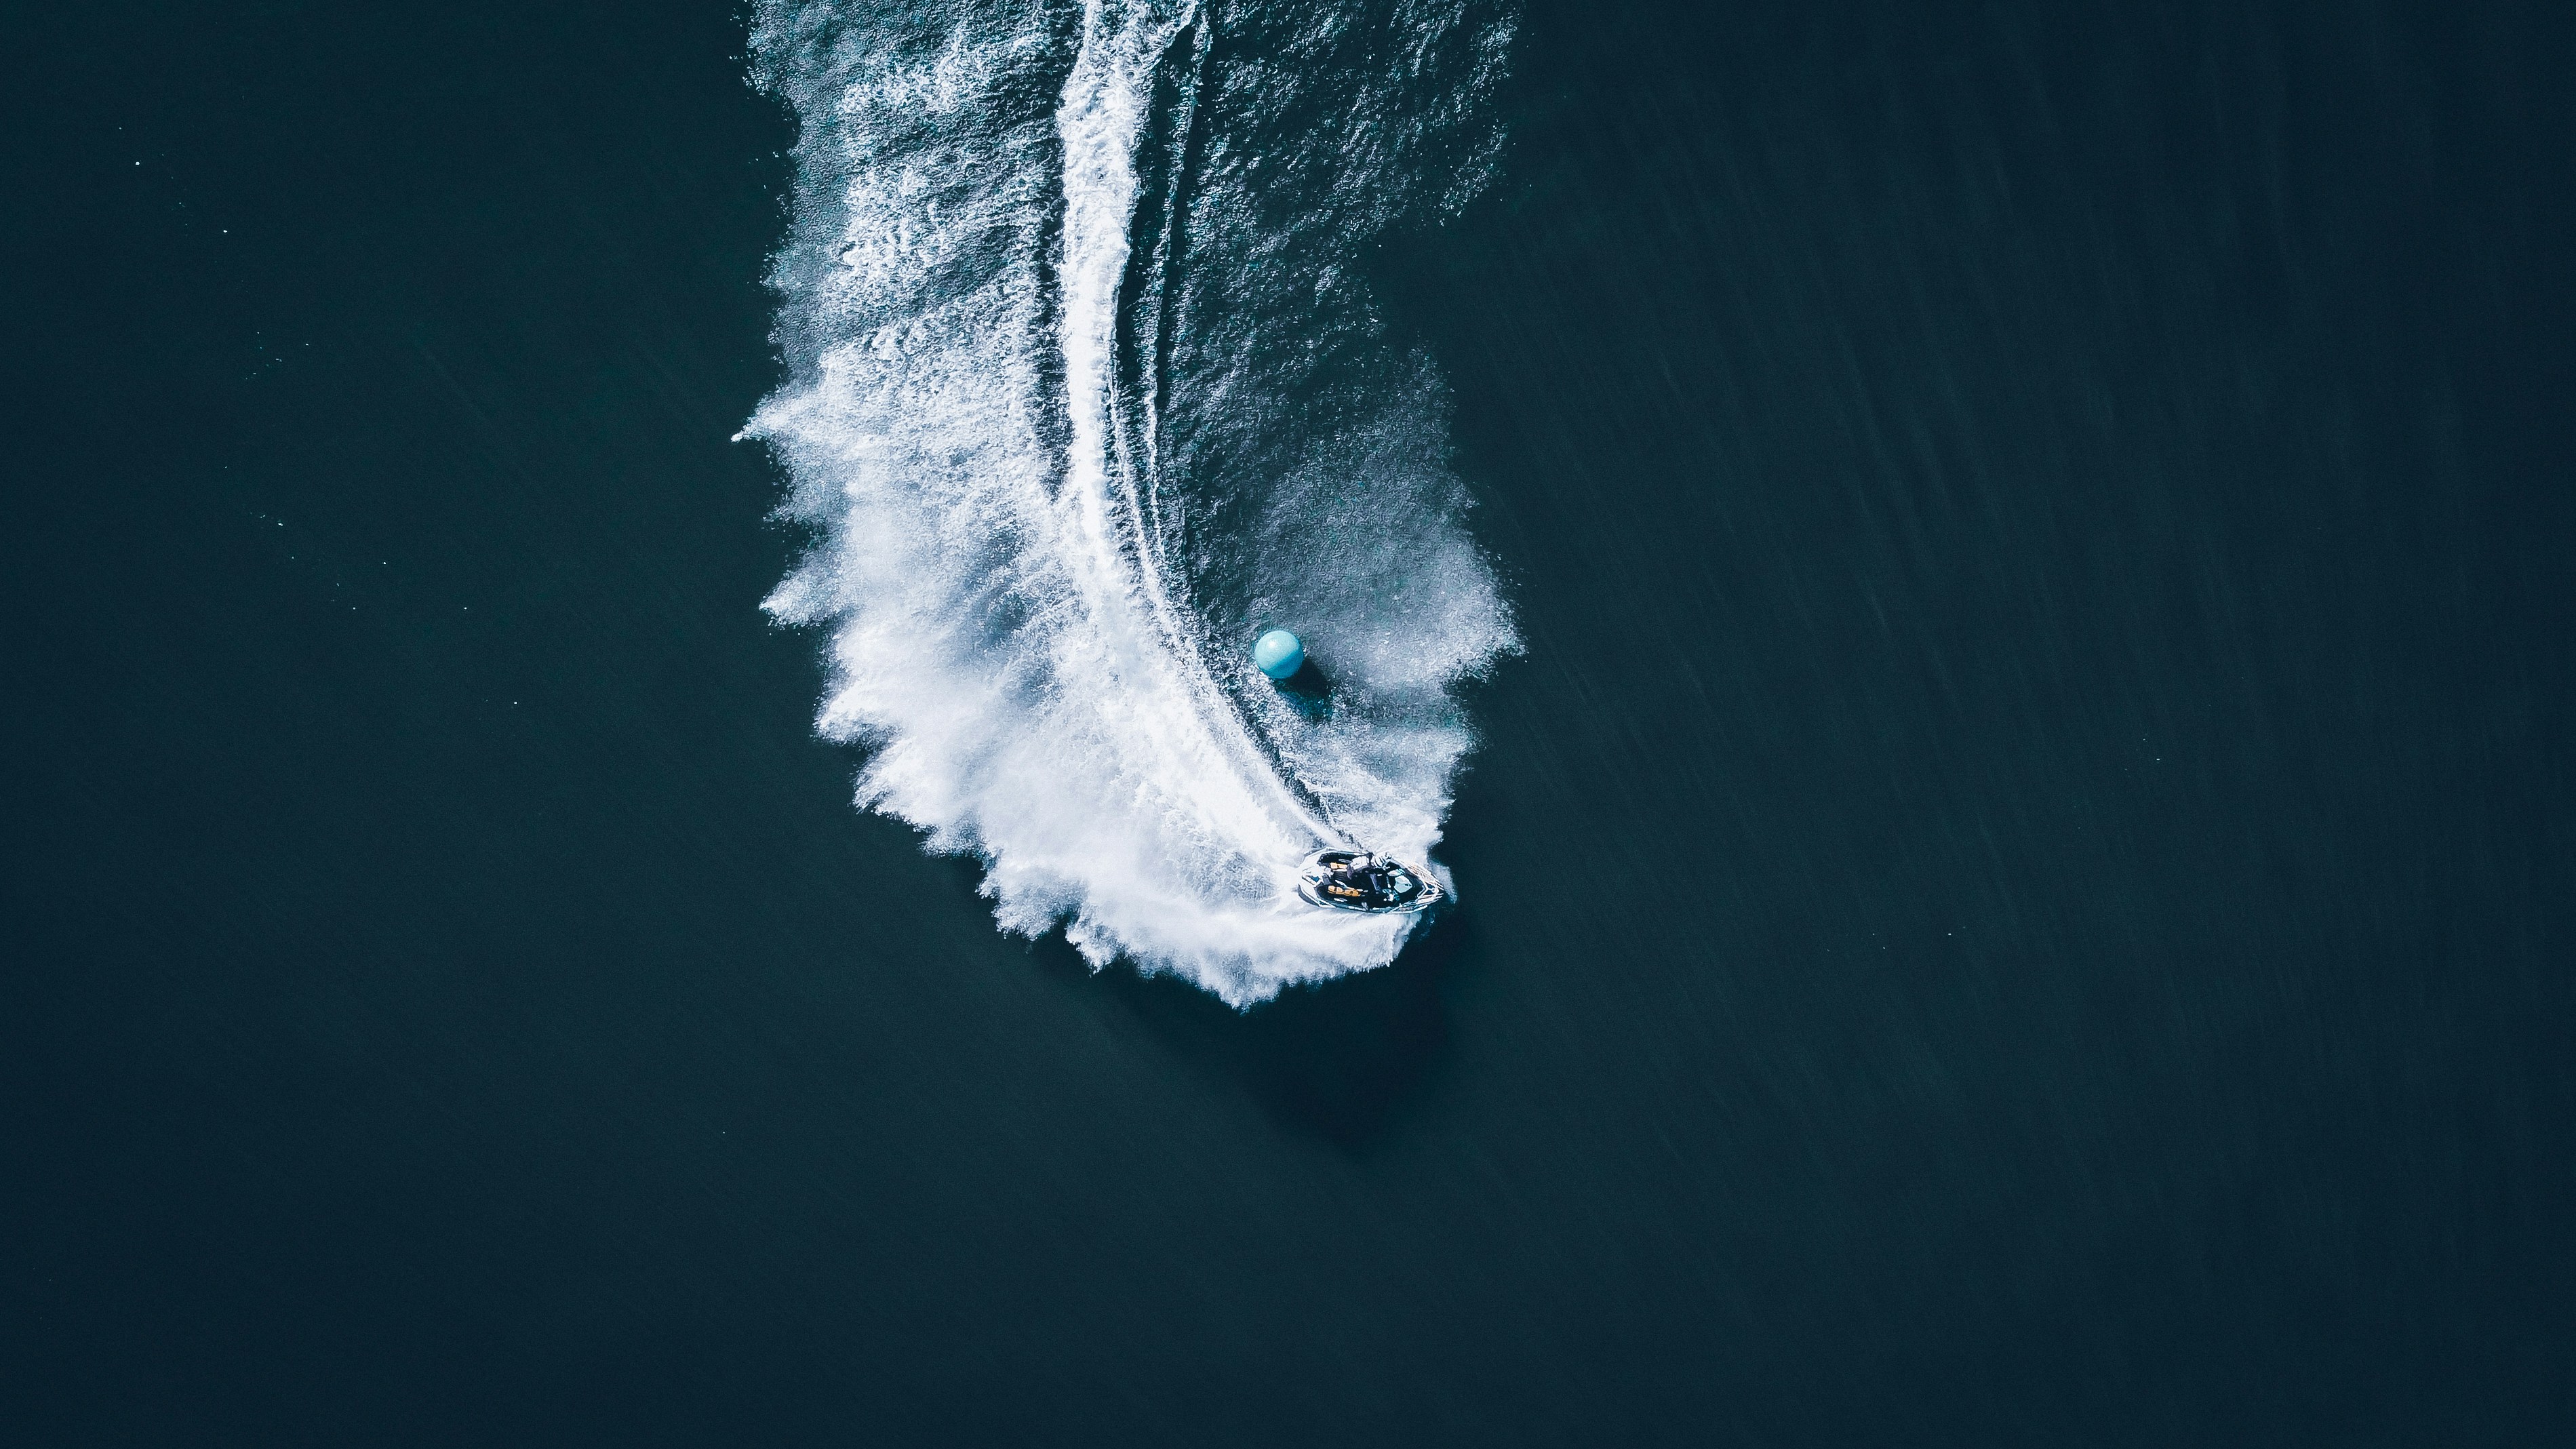 aerial view of white boat on water